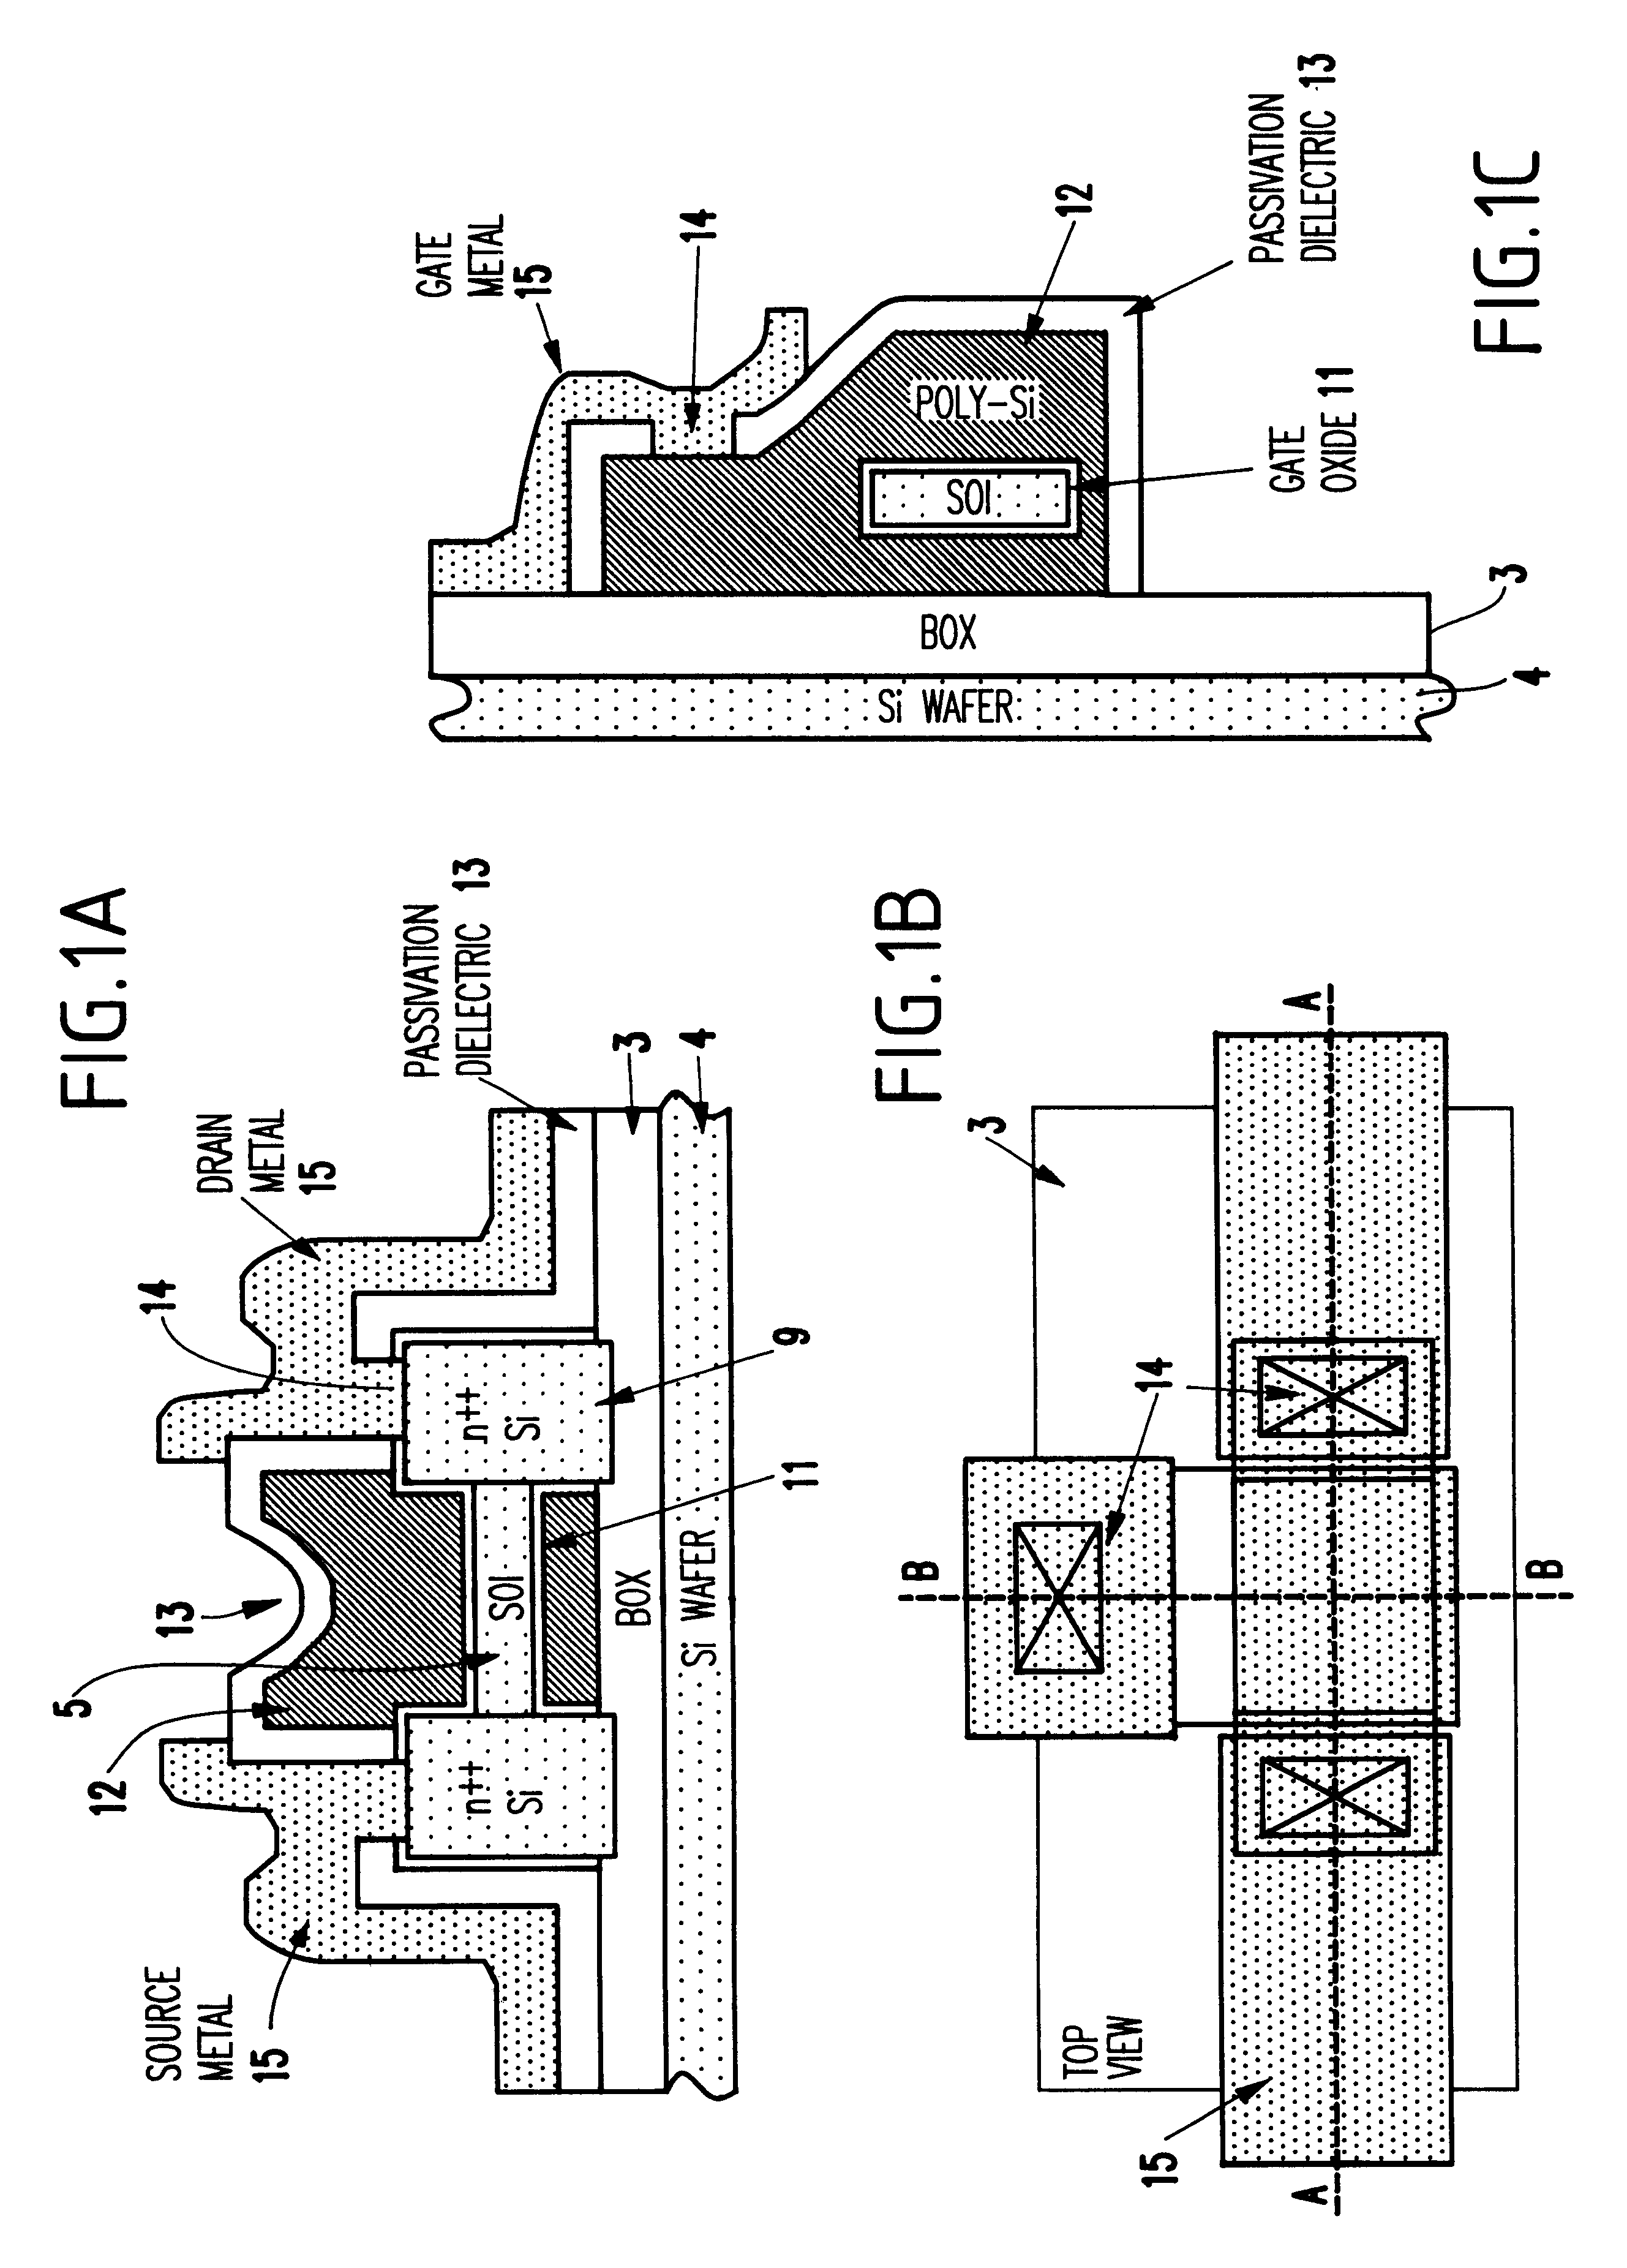 Self-aligned double-gate MOSFET by selective epitaxy and silicon wafer bonding techniques